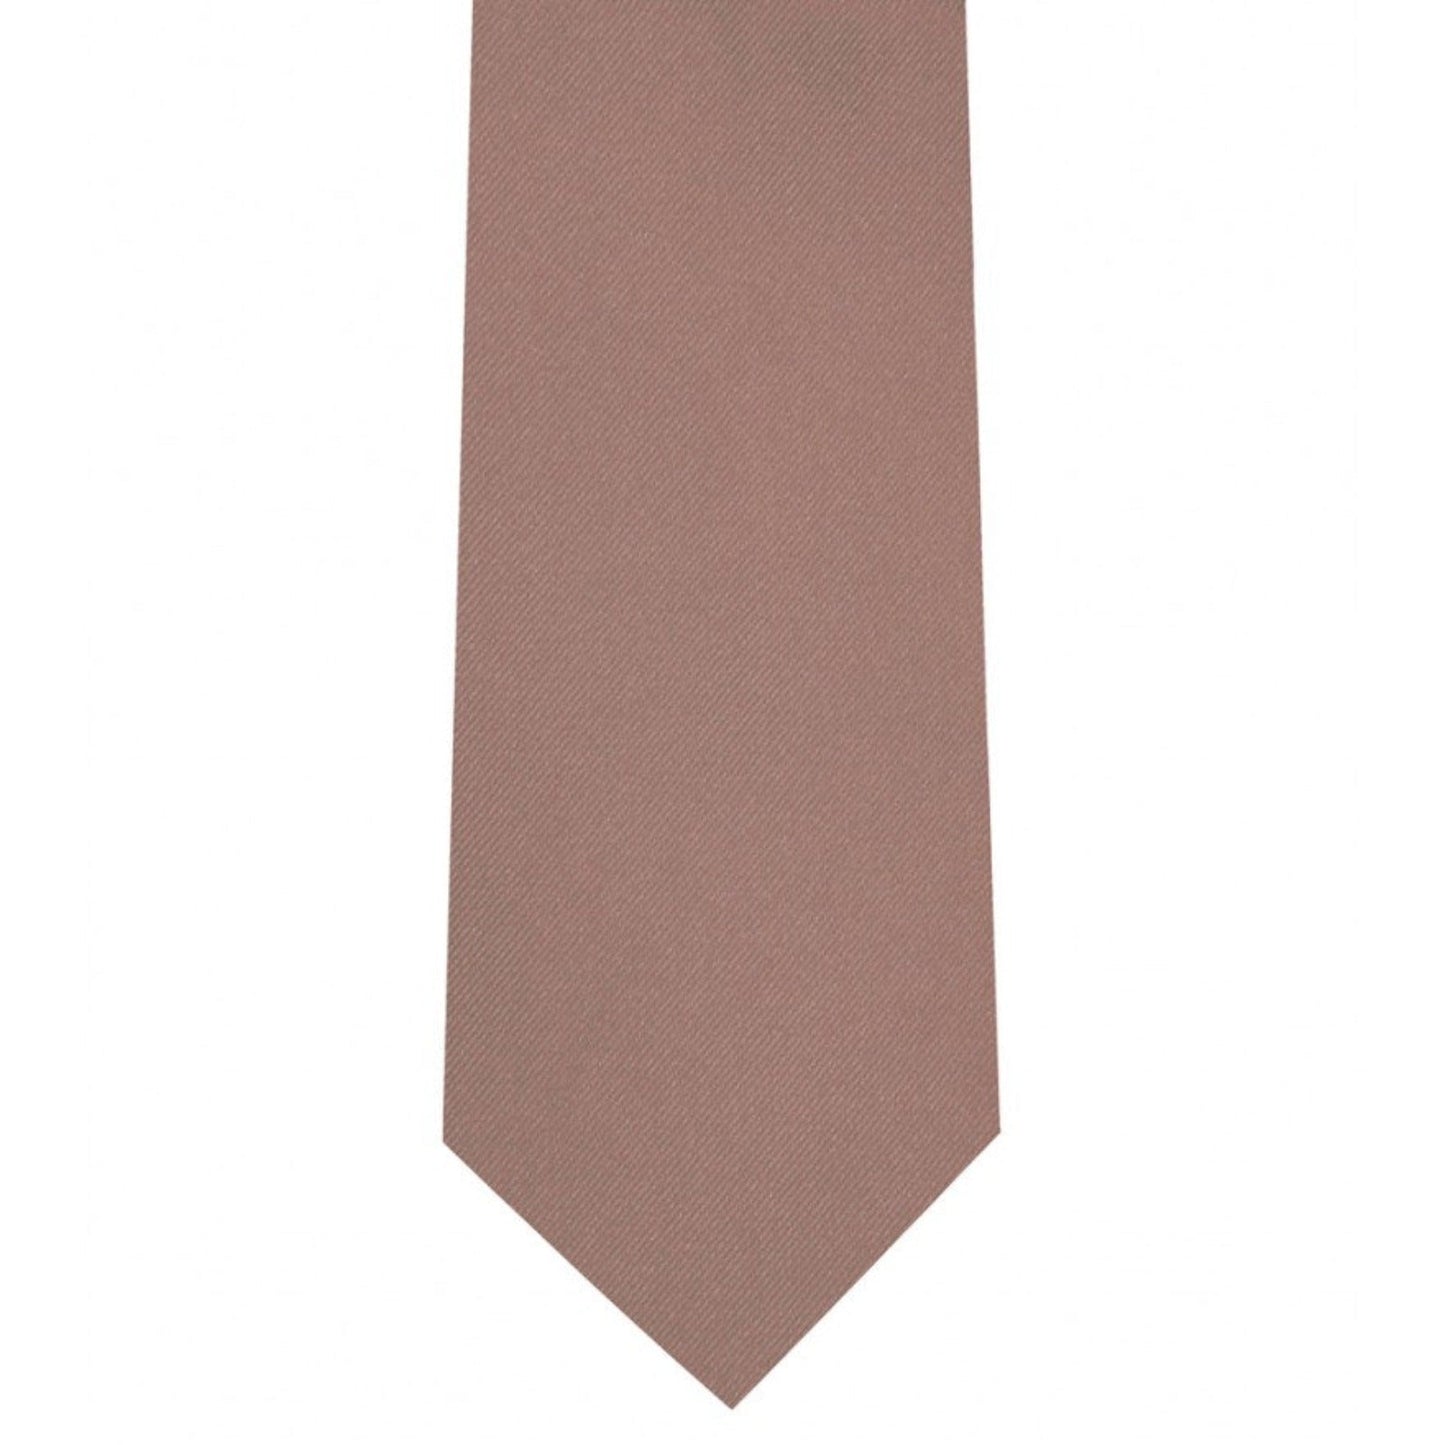 Classic Mauve Tie Ultra Skinny tie width 2.25 inches With Matching Pocket Square | KCT Menswear